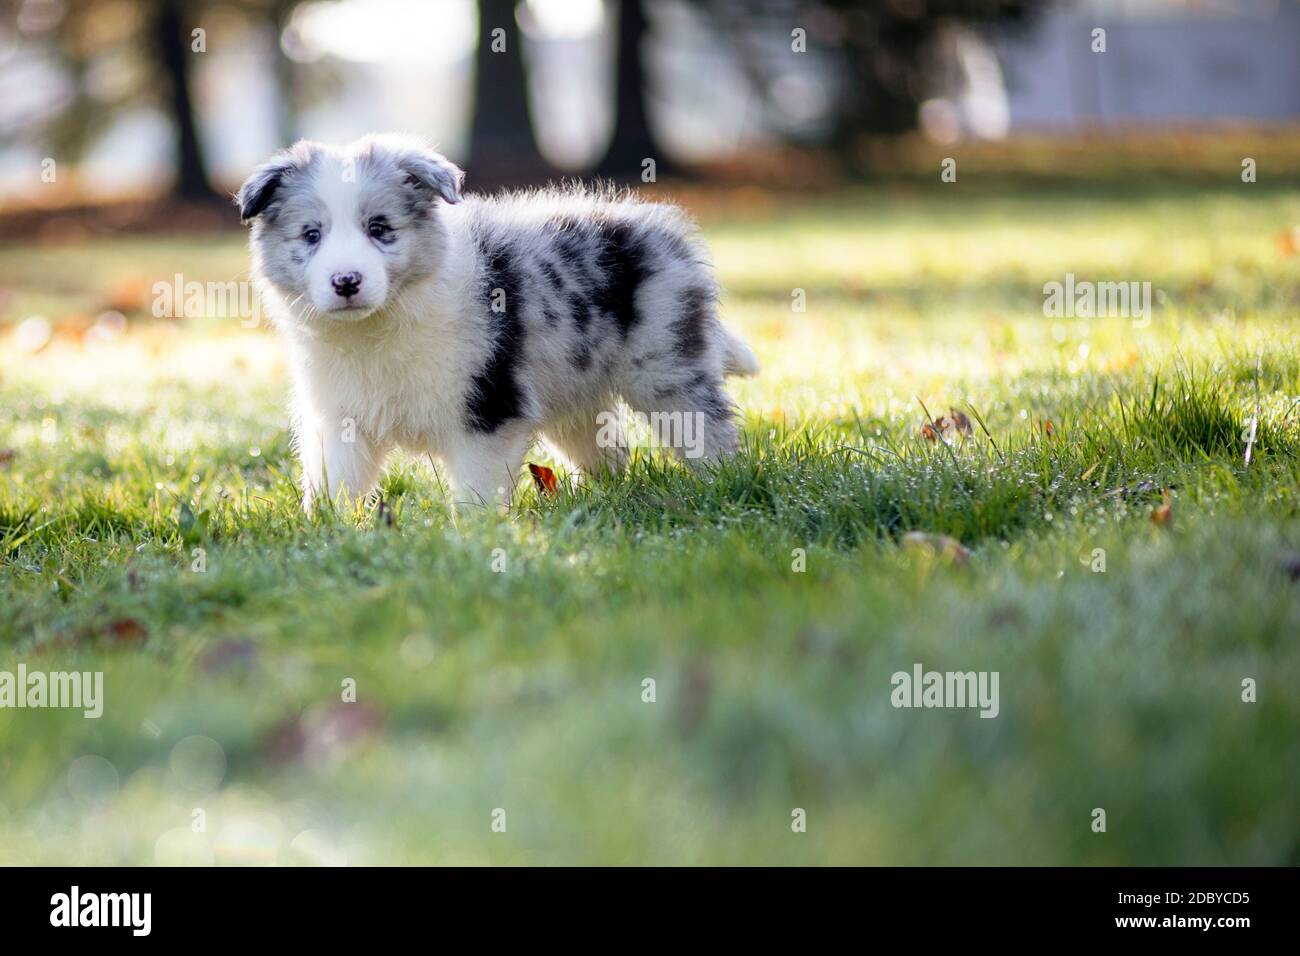 Little Border Collie Blue Merle puppy 8 weeks old running on grass in a  park in fall Stock Photo - Alamy